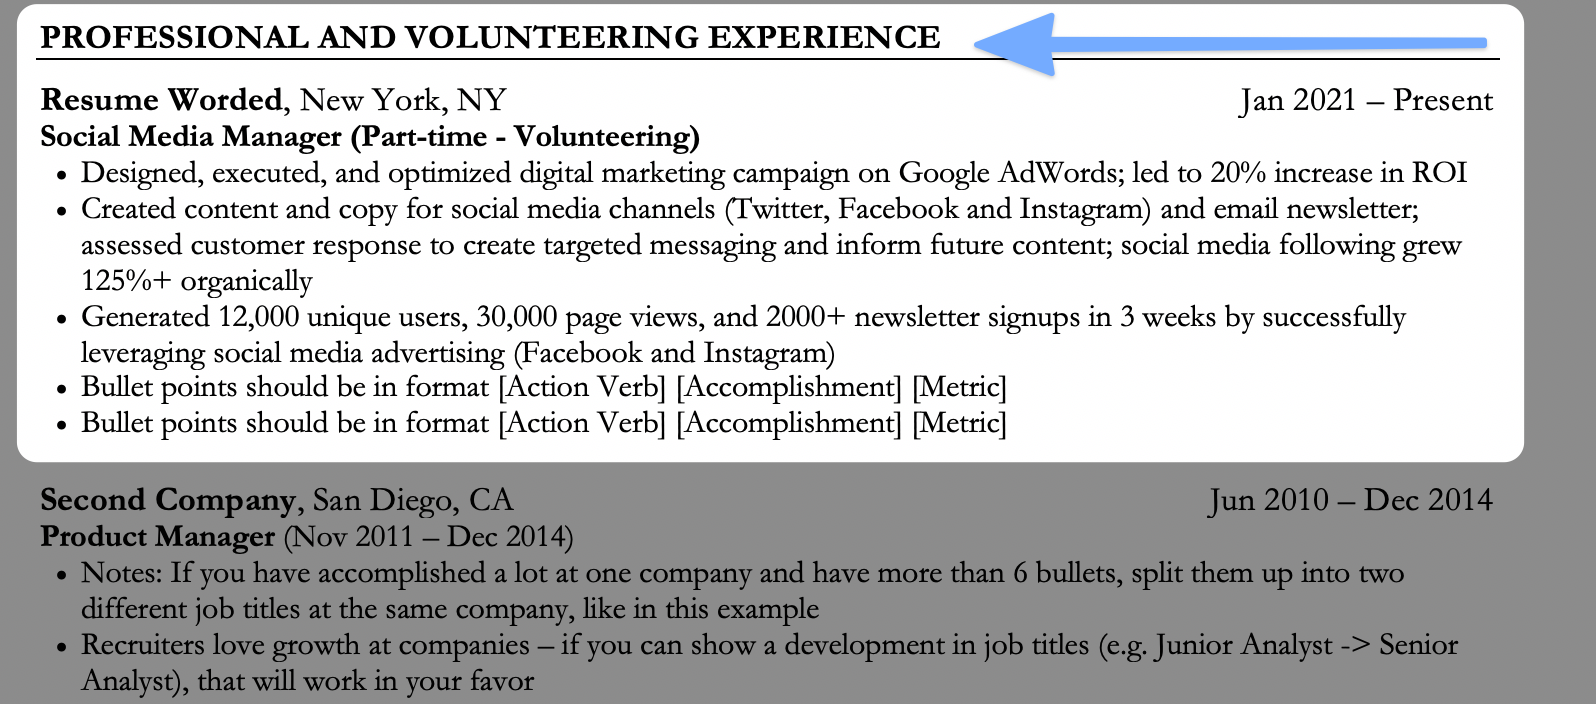 How to list volunteer experience during your time off, to hide a gap on your resume